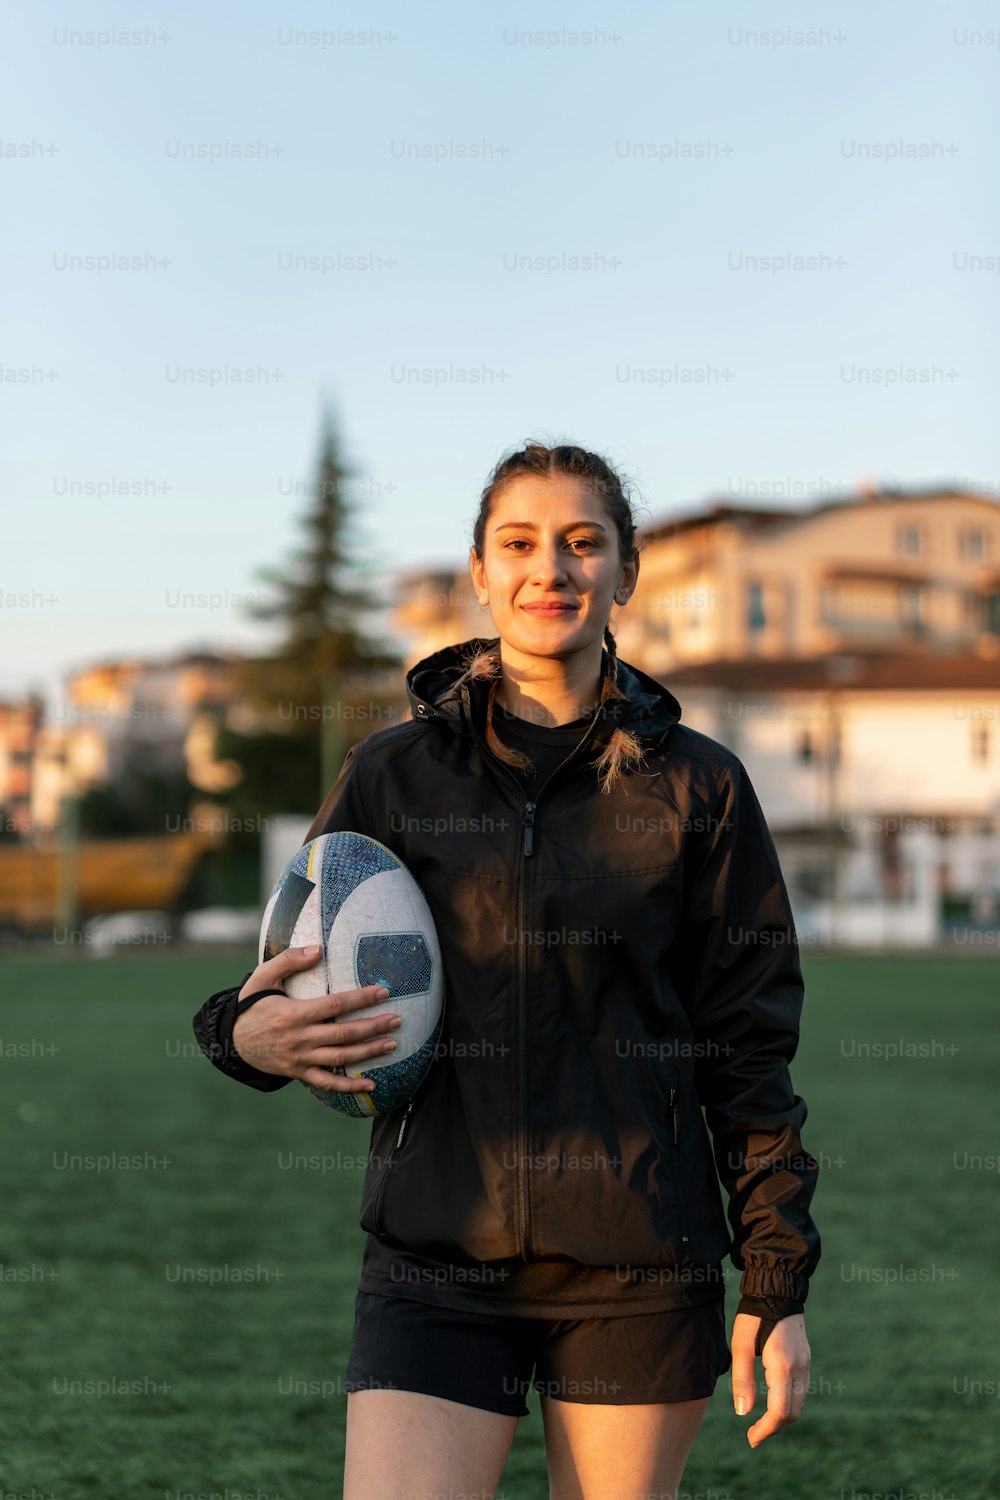 a woman holding a soccer ball in a field